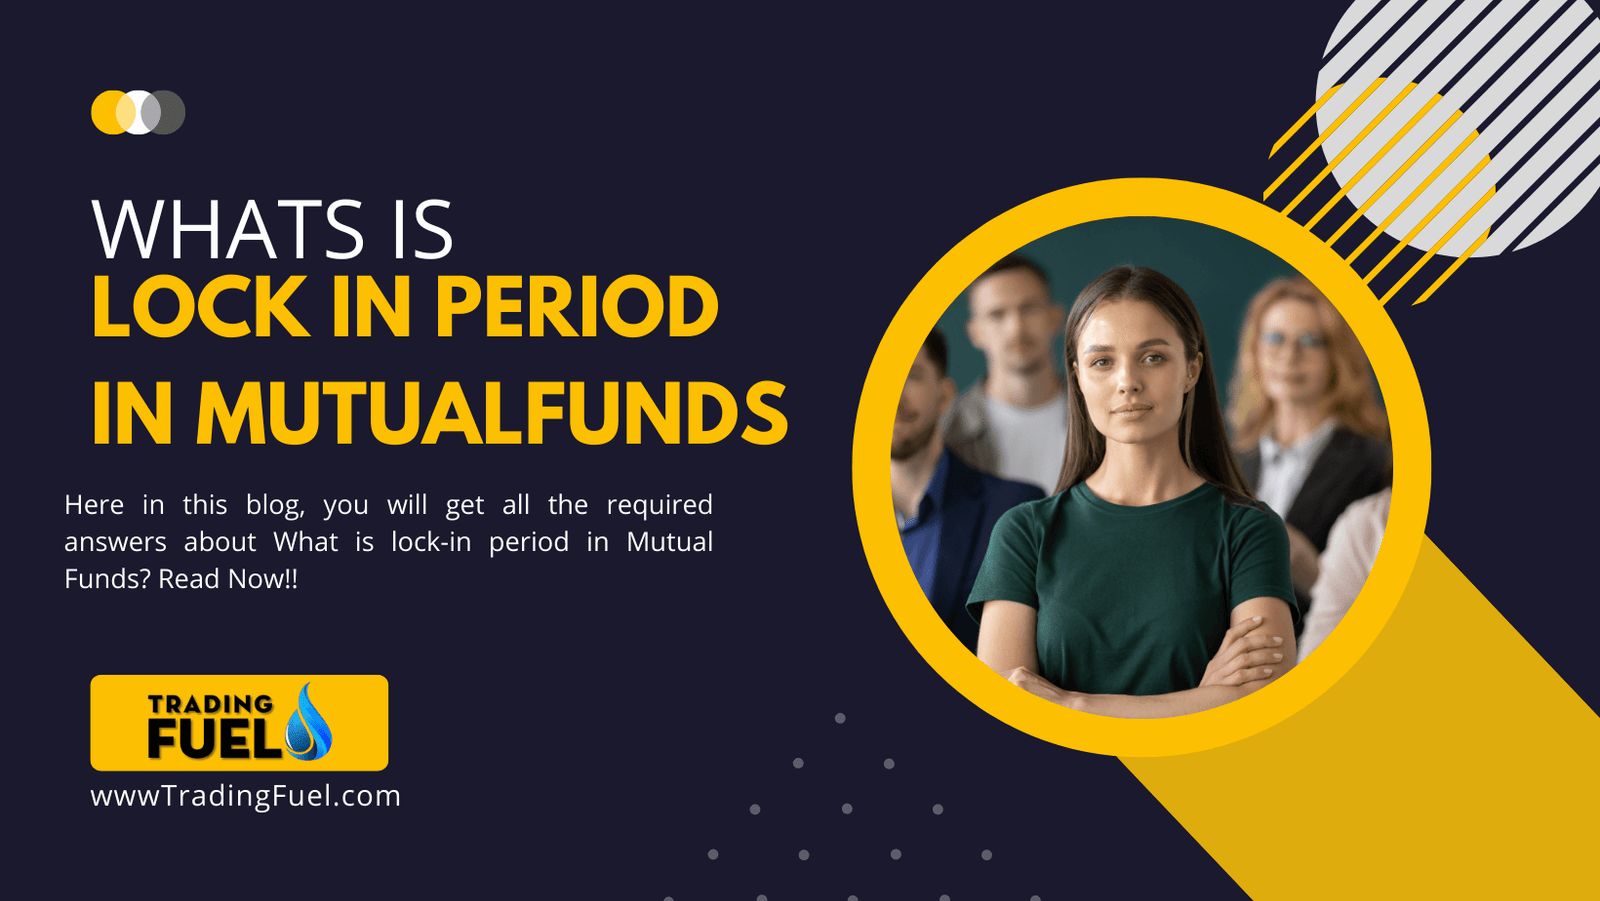 What is lock-in period in mutual funds?